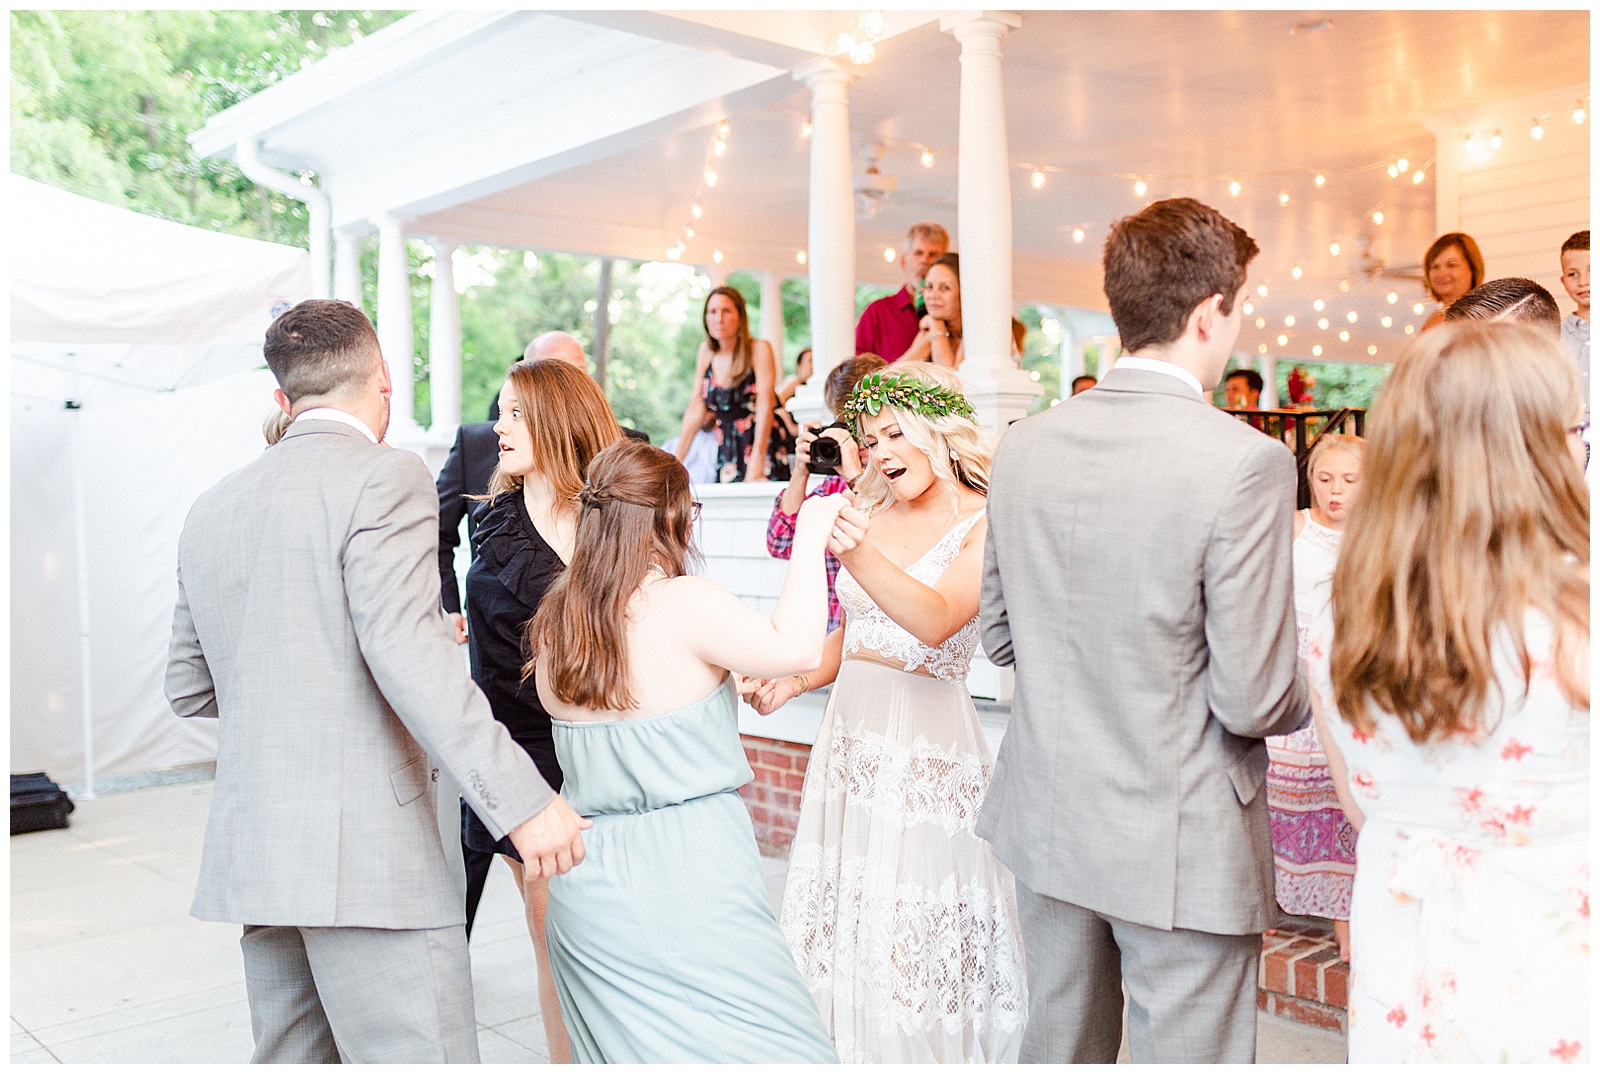 Gorgeous Fairy Light Venue with Bohemian Bride and Groom from Boho Chic Summer Wedding in Charlotte, NC | check out the full wedding at KevynDixonPhoto.com 